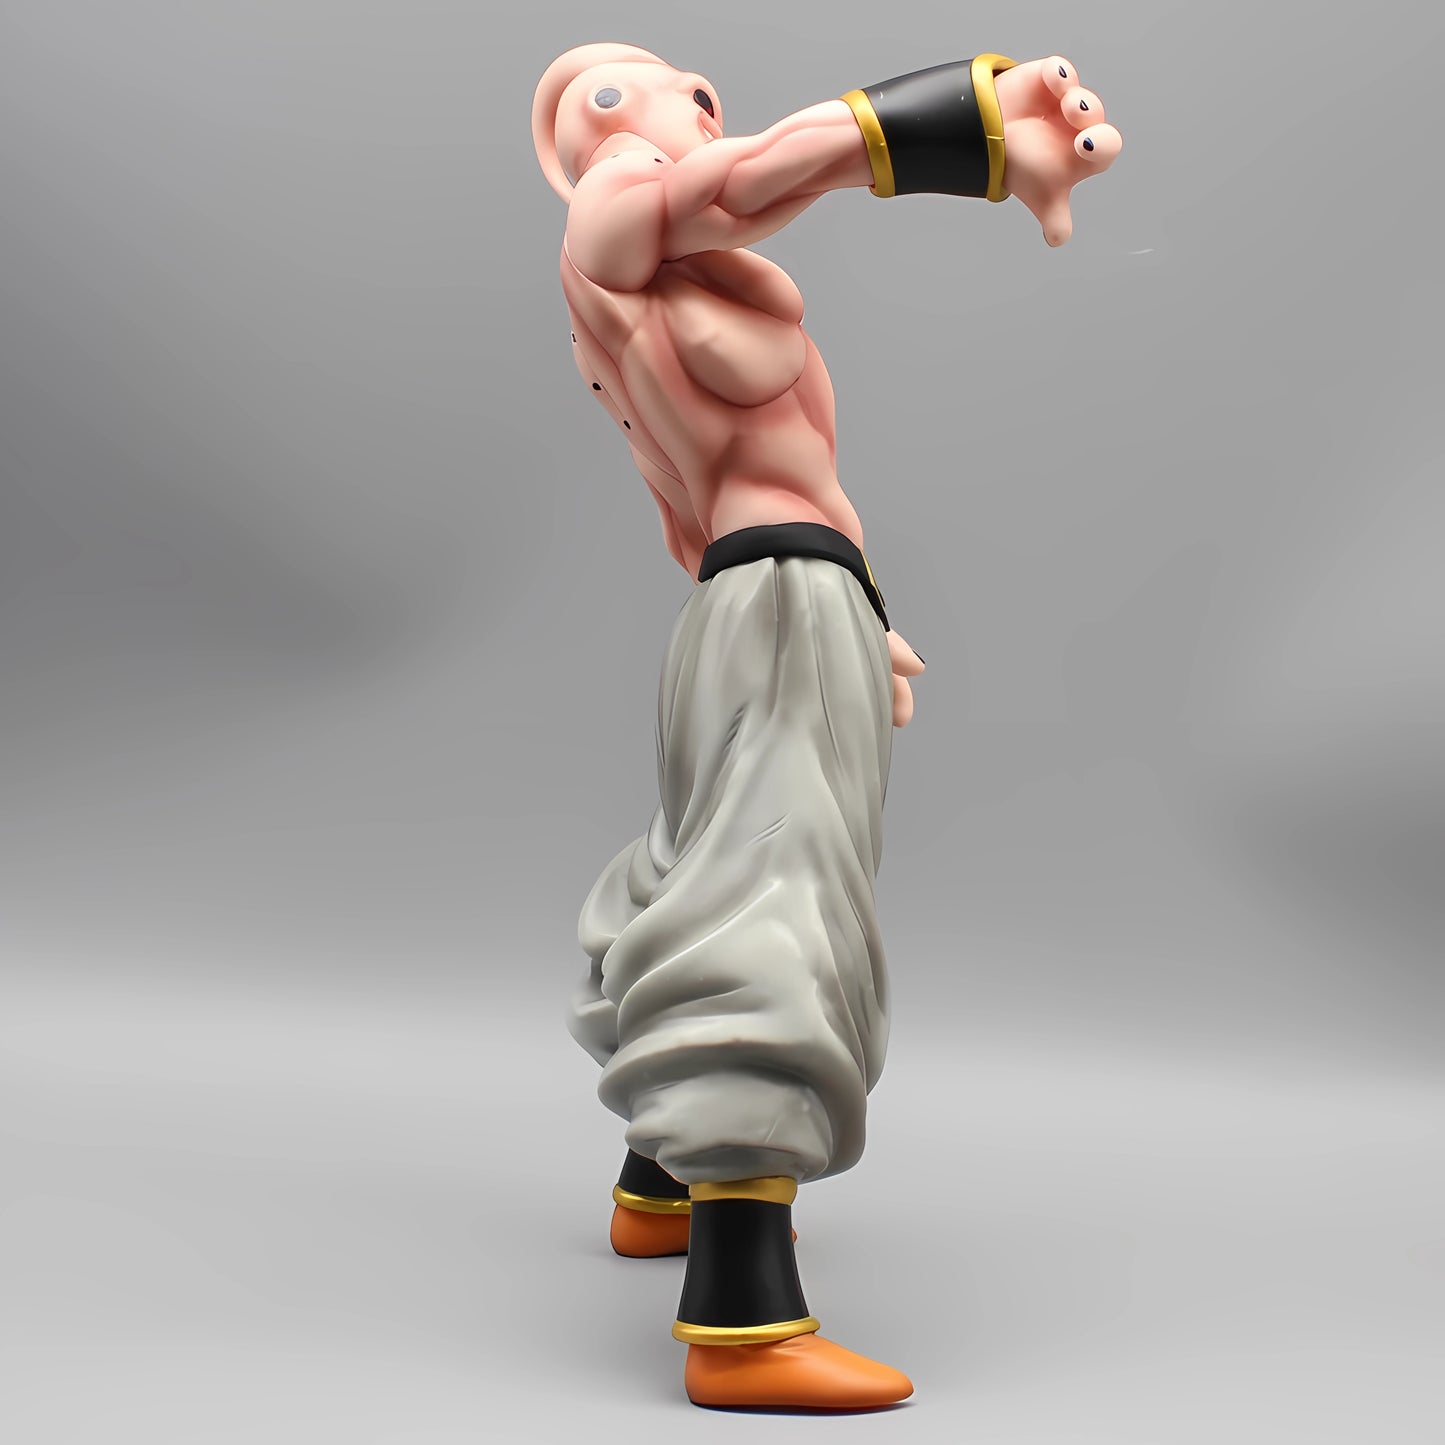 Detailed side view of the 'Malevolent Majin Buu' figure from Dragon Ball, showcasing the character's muscular physique and the flowing grey pants, on a plain background.